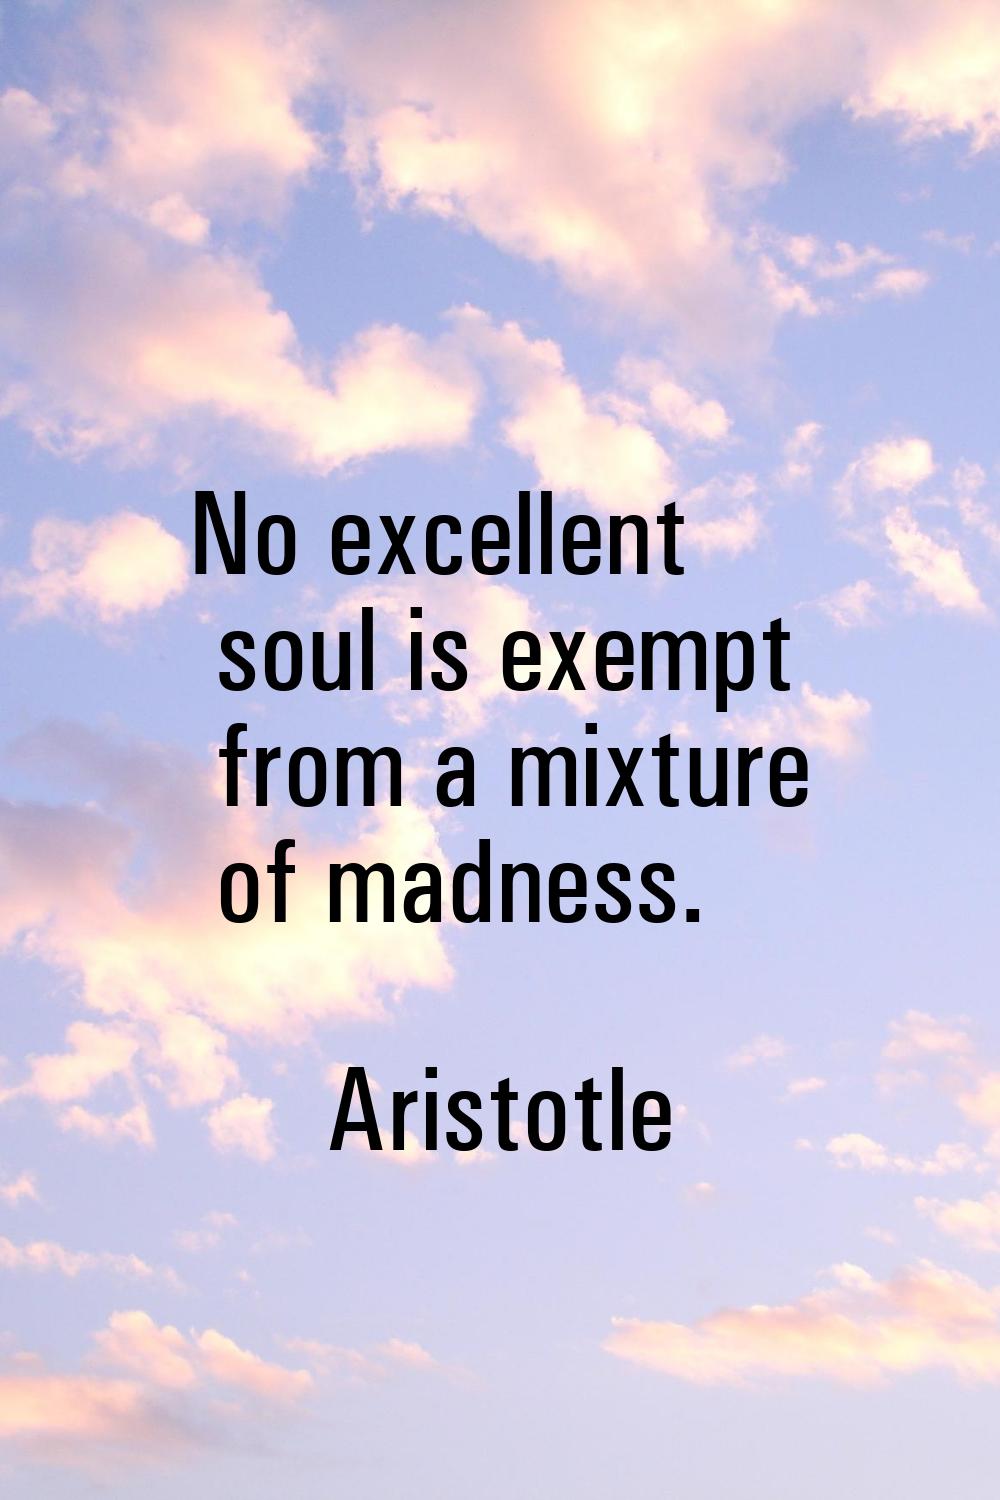 No excellent soul is exempt from a mixture of madness.